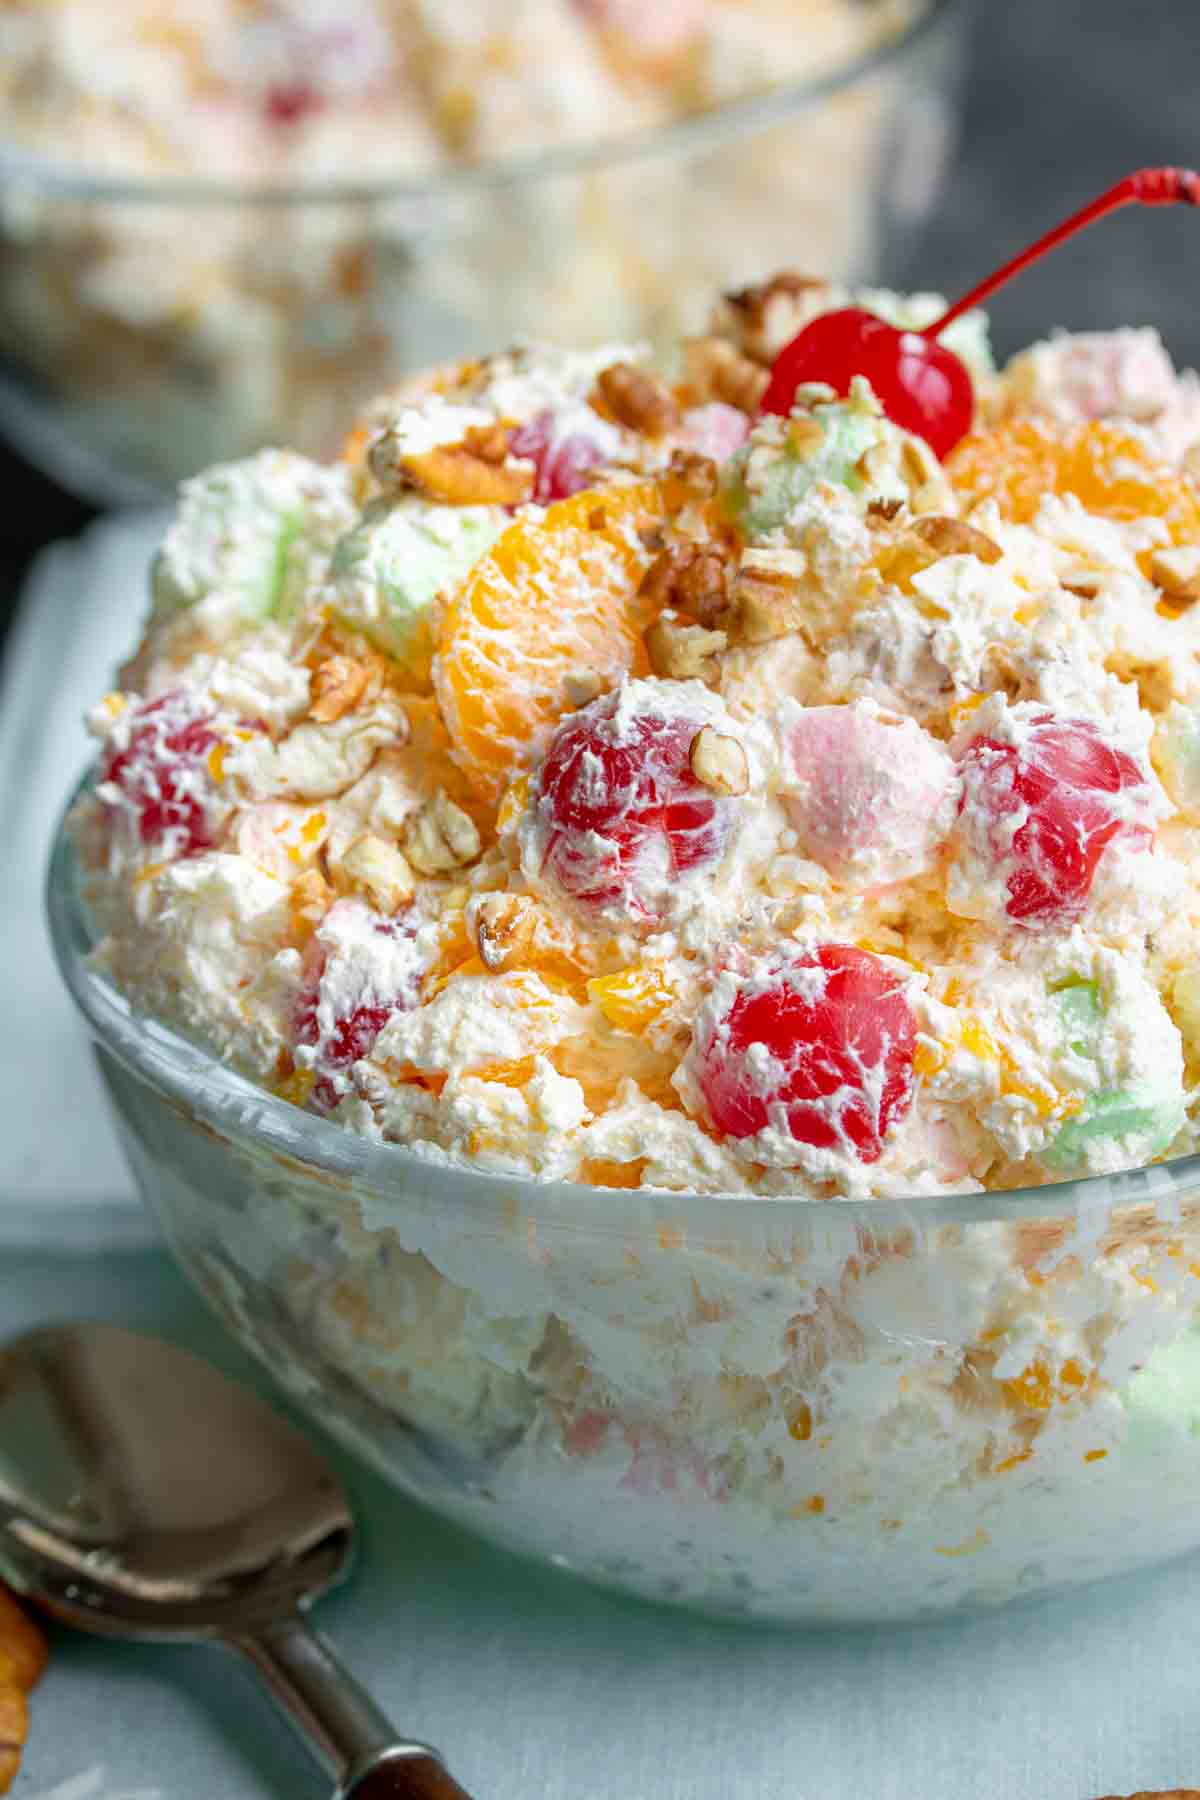 marshmallow fruit salad in a clear glass bowl